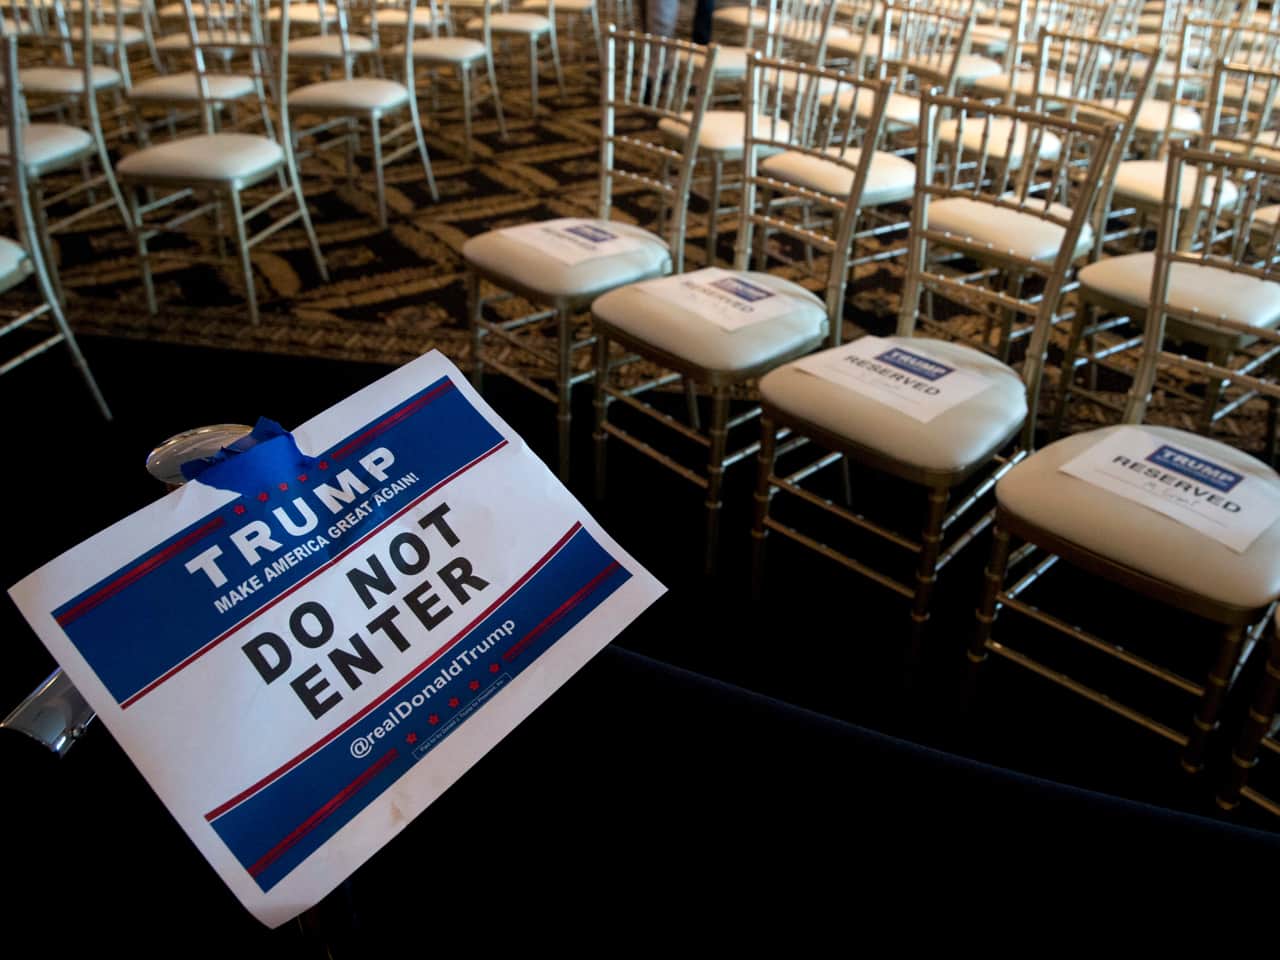 In this 7 June 2016 file photo, a sign separates members of the media from invited guests at Donald Trump's news conference at the Trump National Golf Club Westchester, N.Y., Photo/Mary Altaffer, File